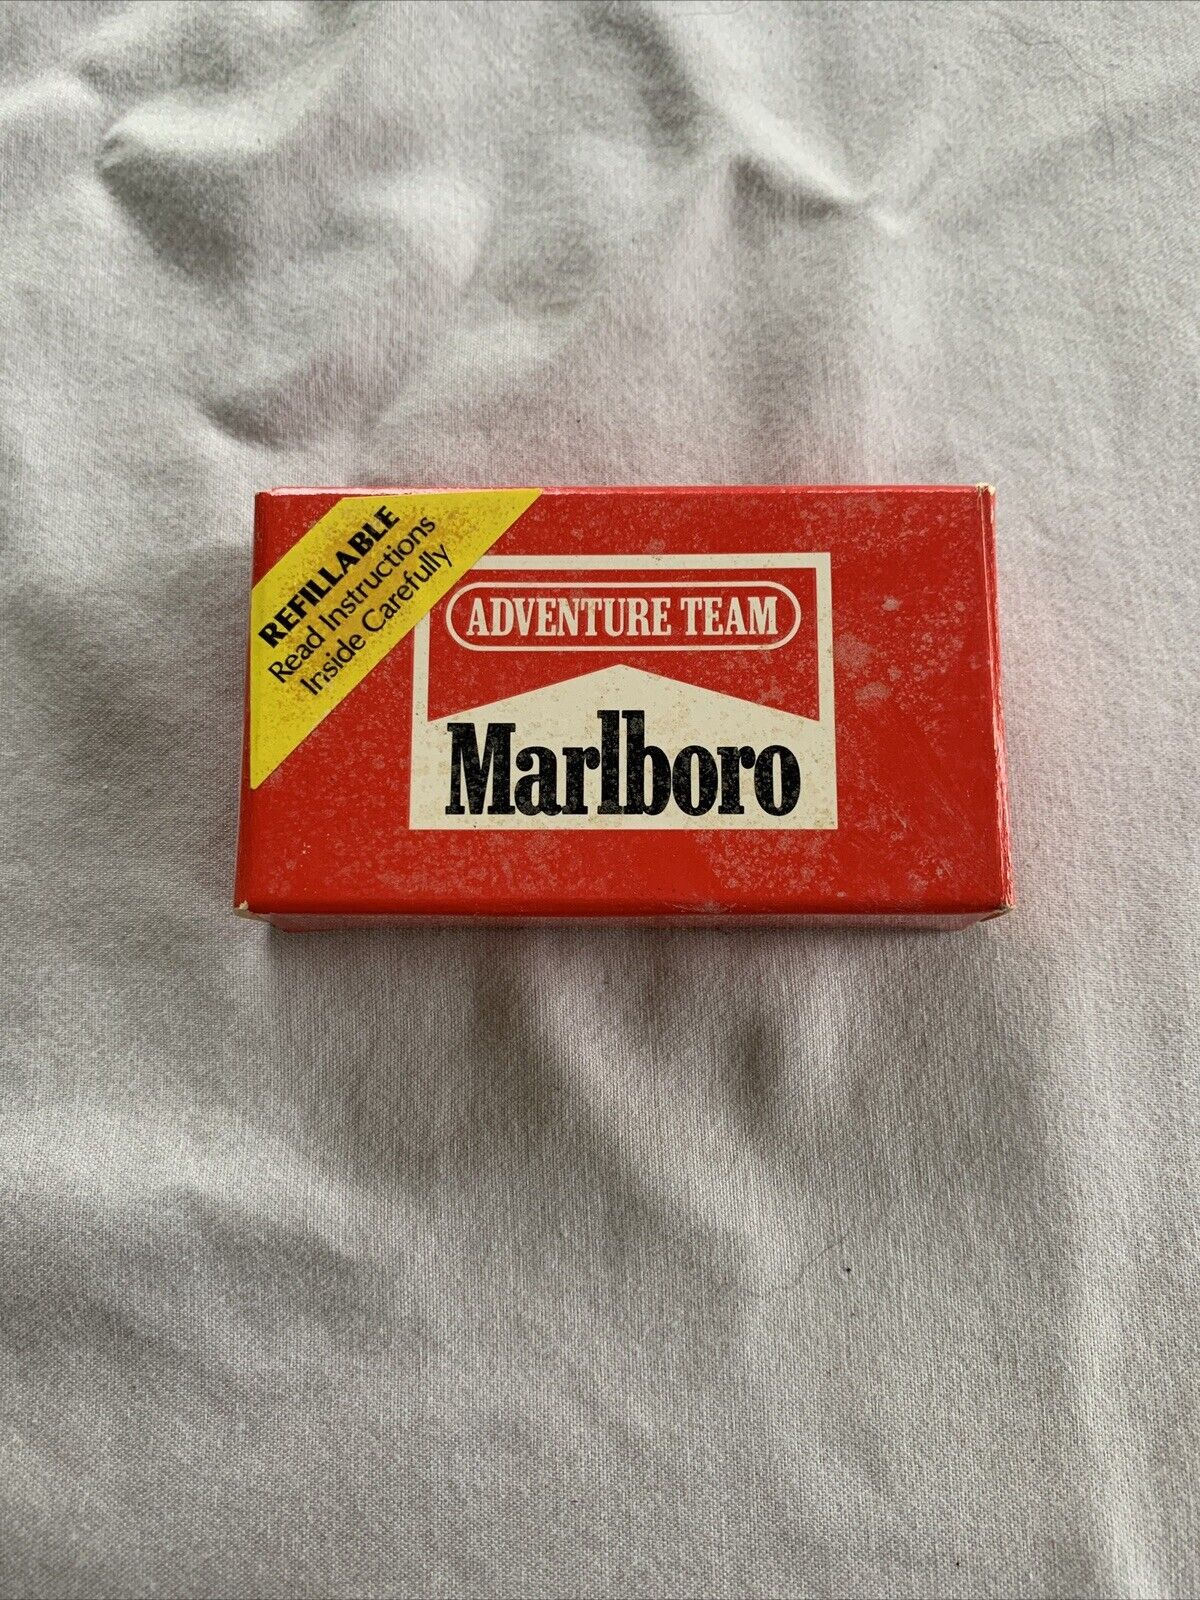 1992 UNFIRED MARLBORO ADVENTURE TEAM CIGARETTE LIGHTER WITH BOX AND INSTRUCTIONS